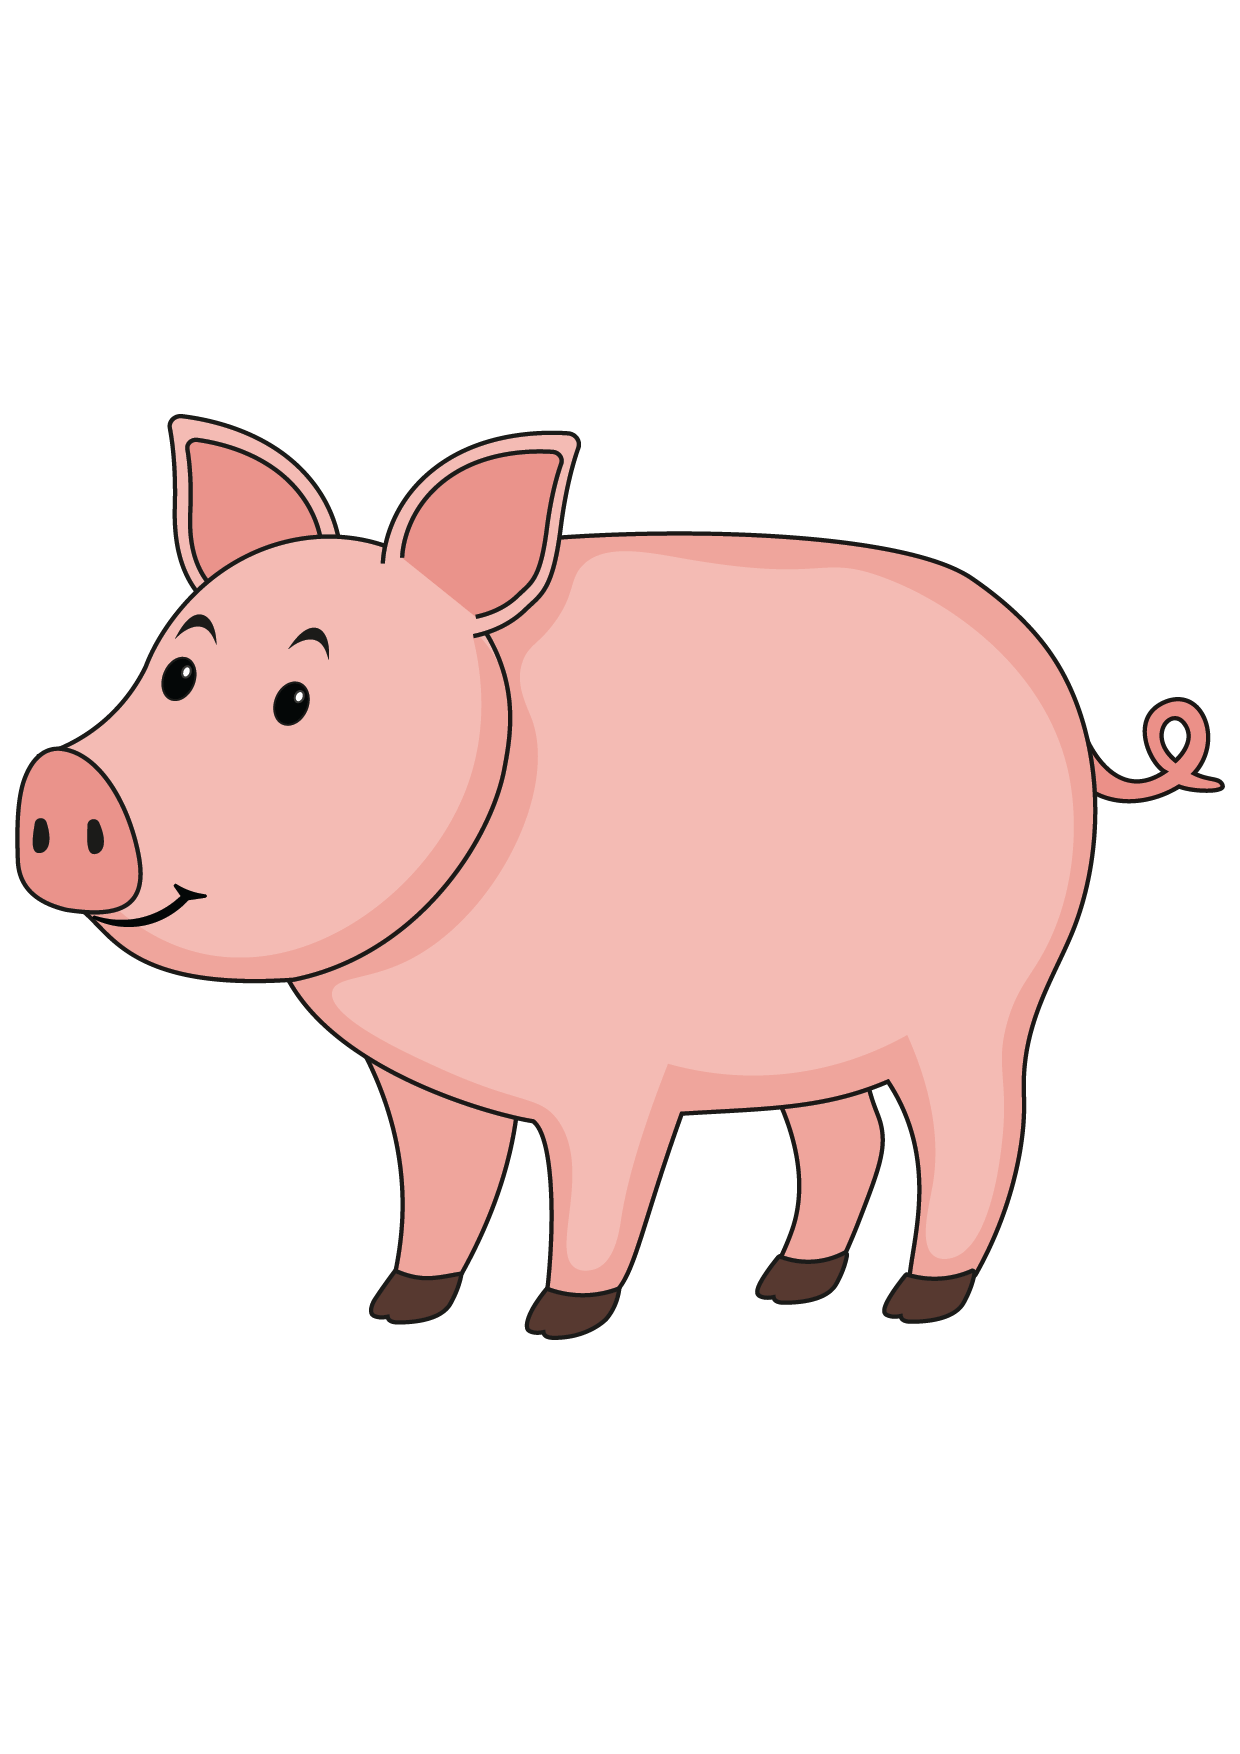 How to Draw A Pig Step by Step Printable